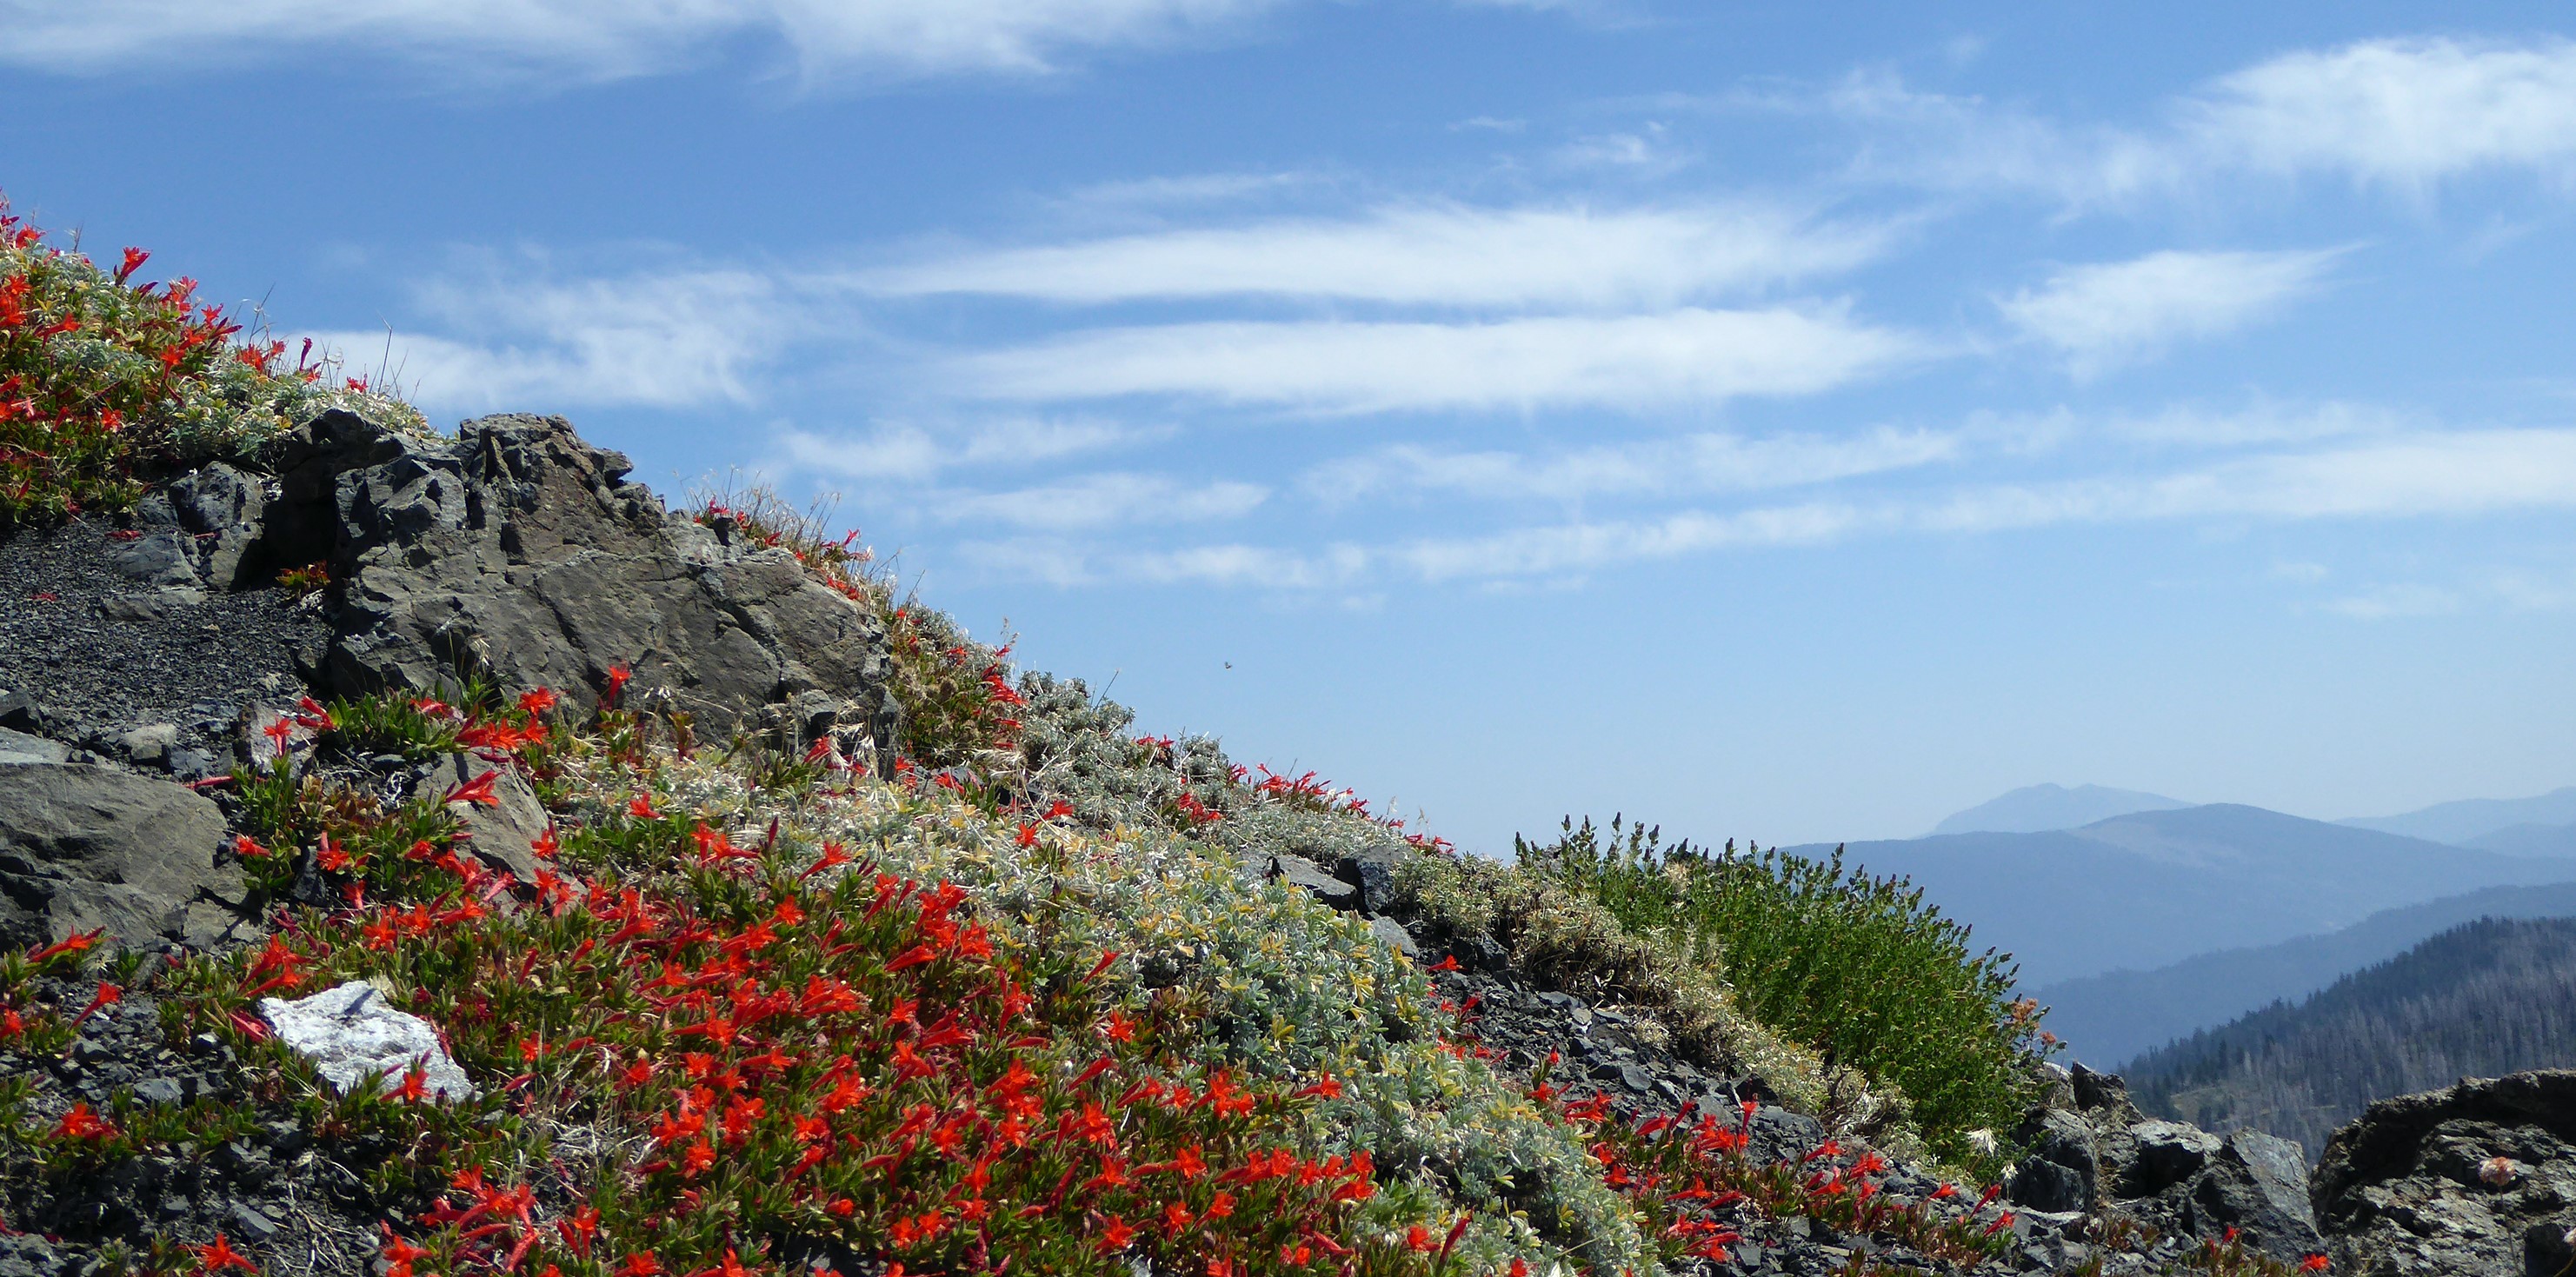 mountain side with red flowers